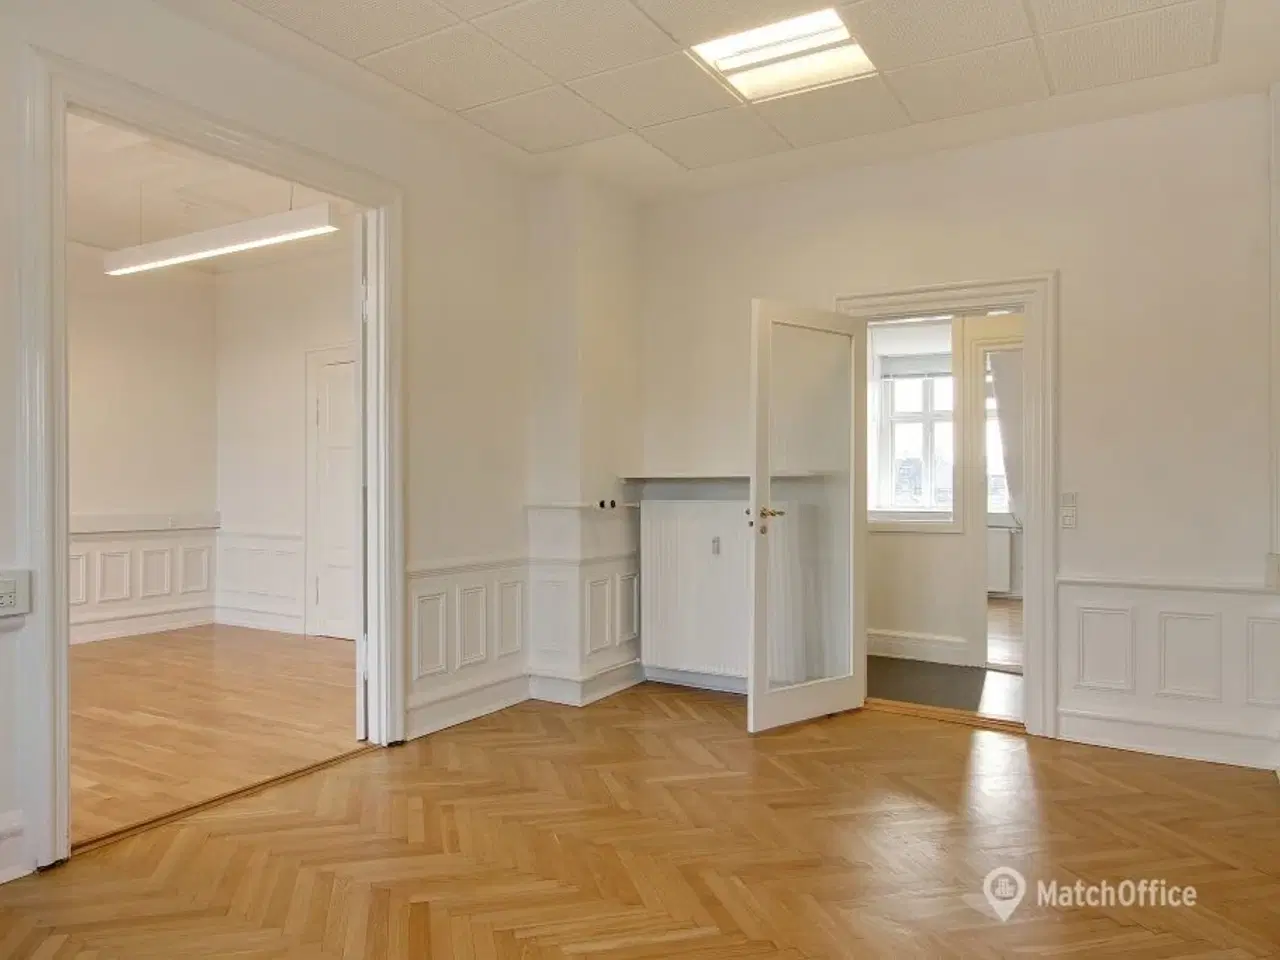 Billede 12 - Offices to rent in a perfectly located shared office space